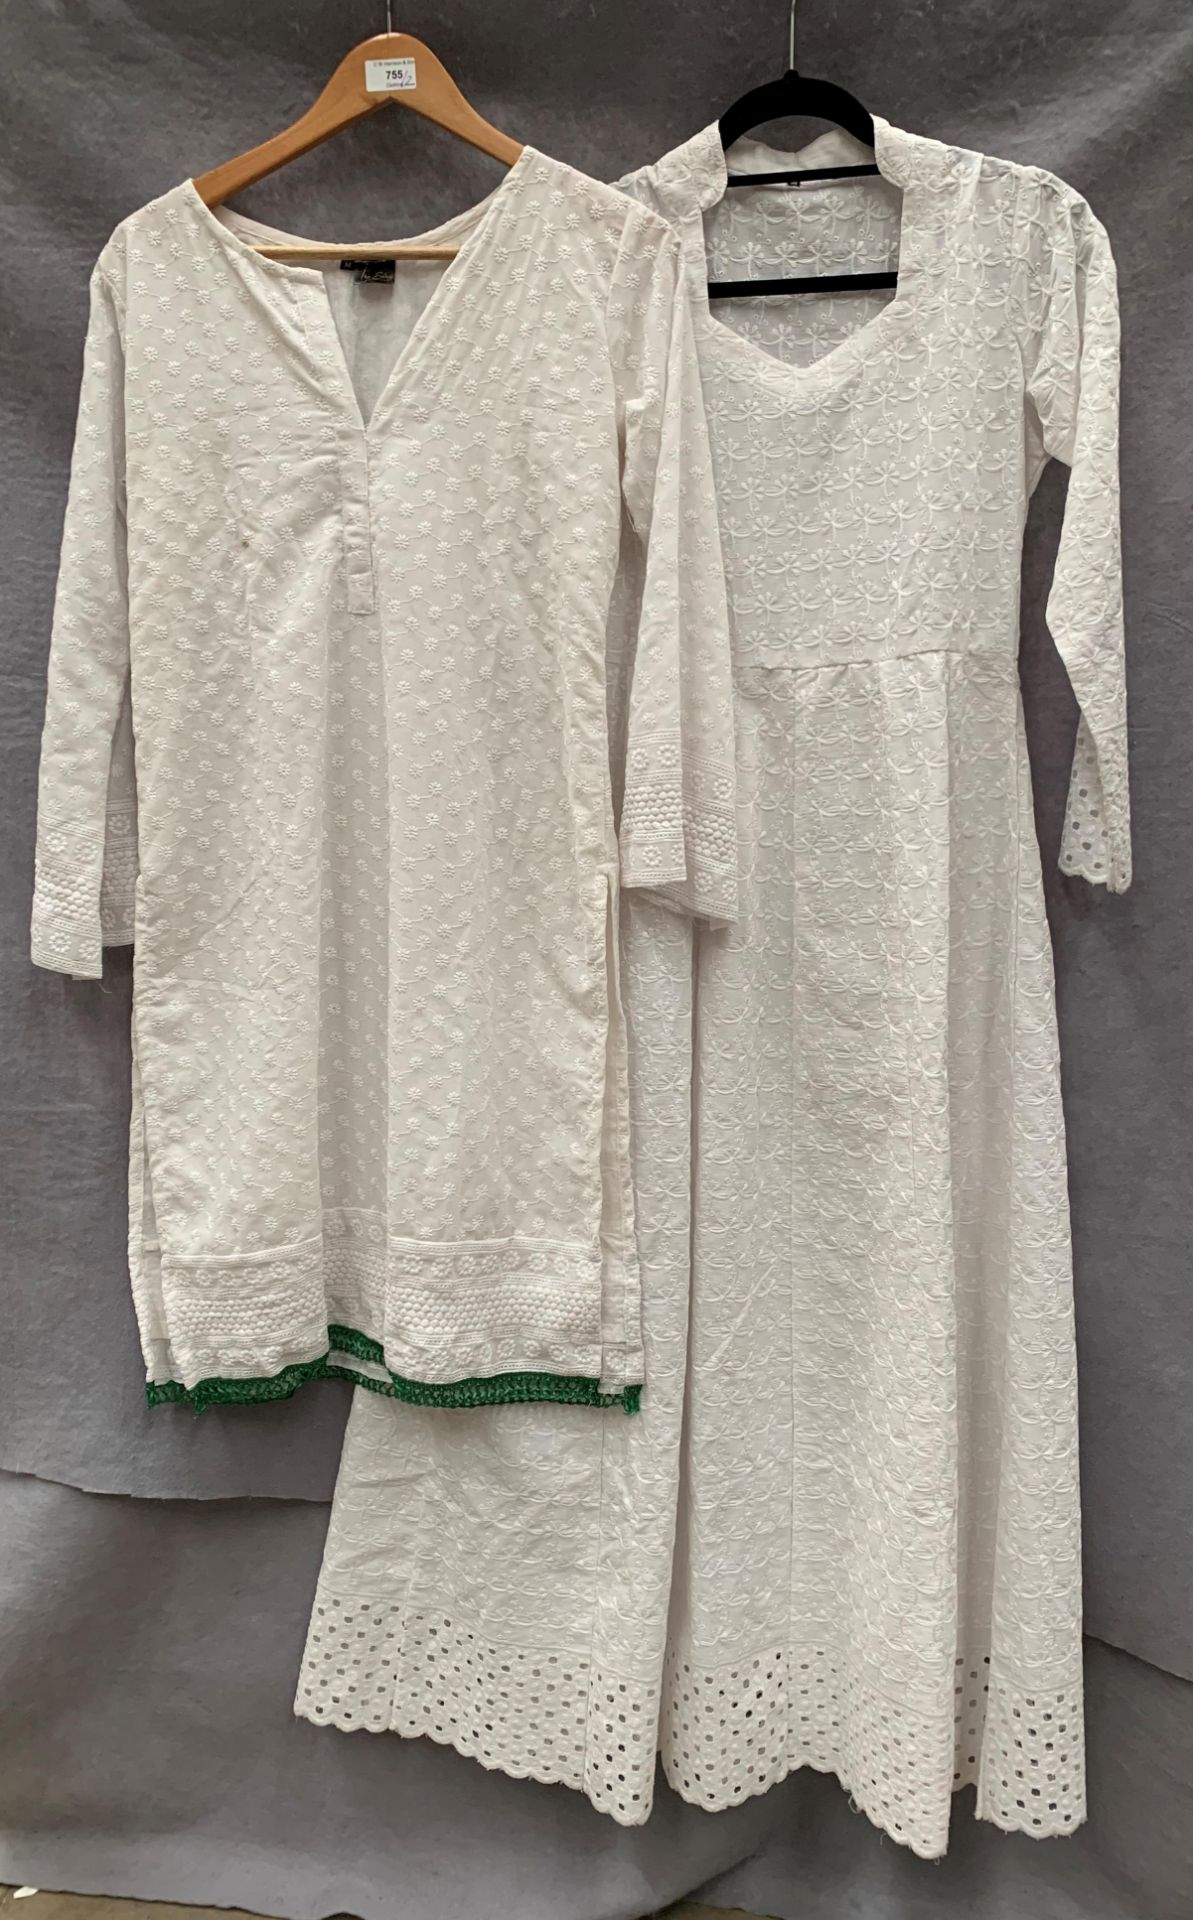 Two tunics (one short and one long) in white,